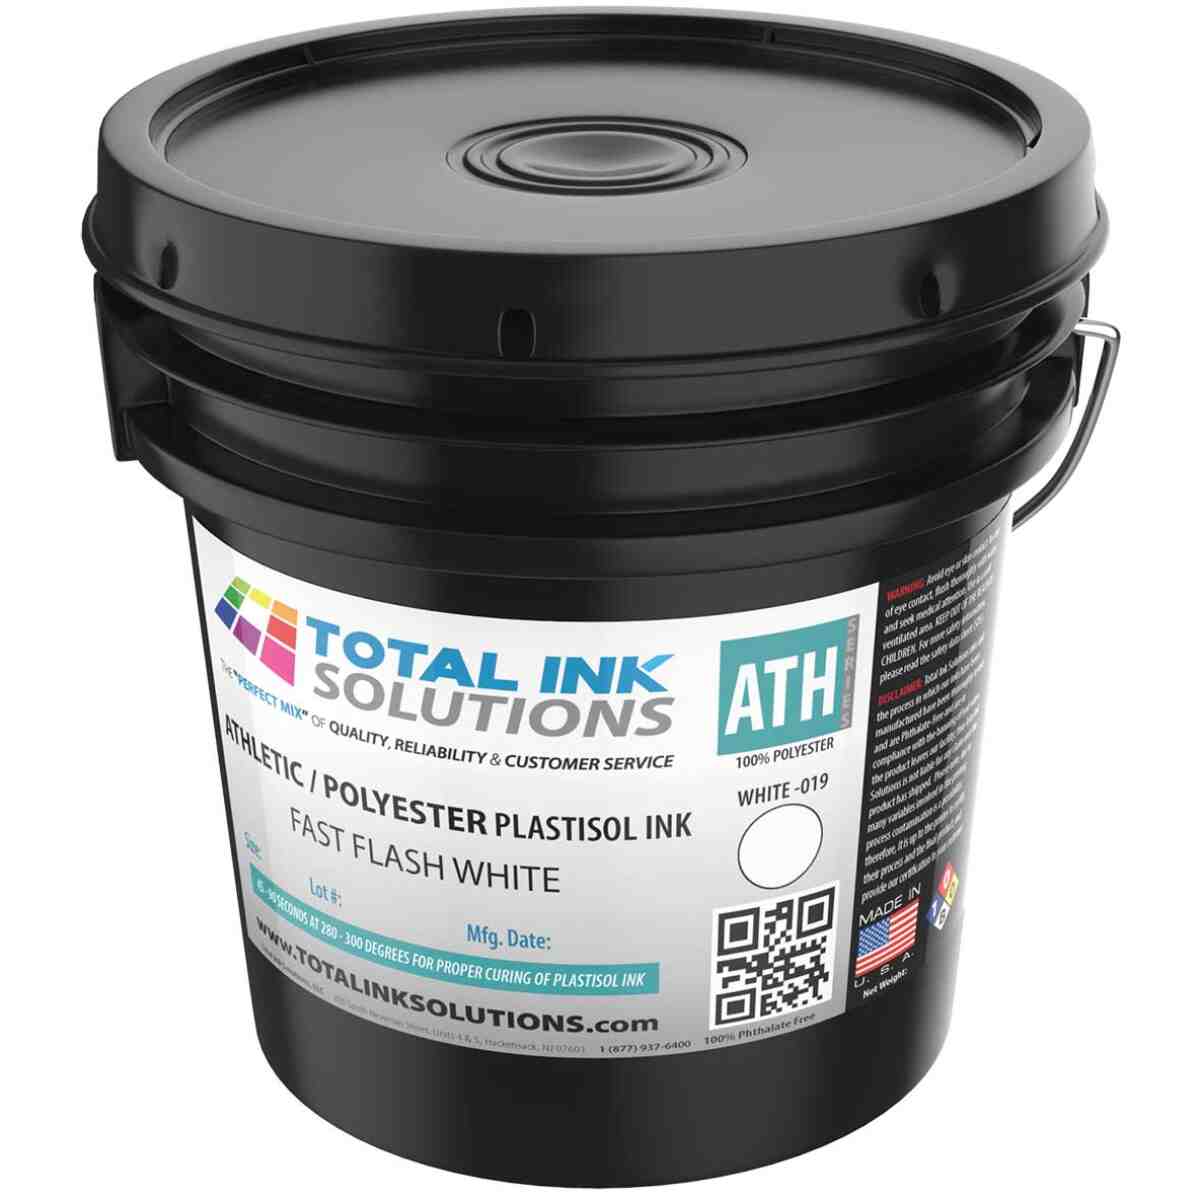 Fast Flash Athletic 100% Polyester Plastisol Ink - White - Gallon TOTAL INK SOLUTIONS®